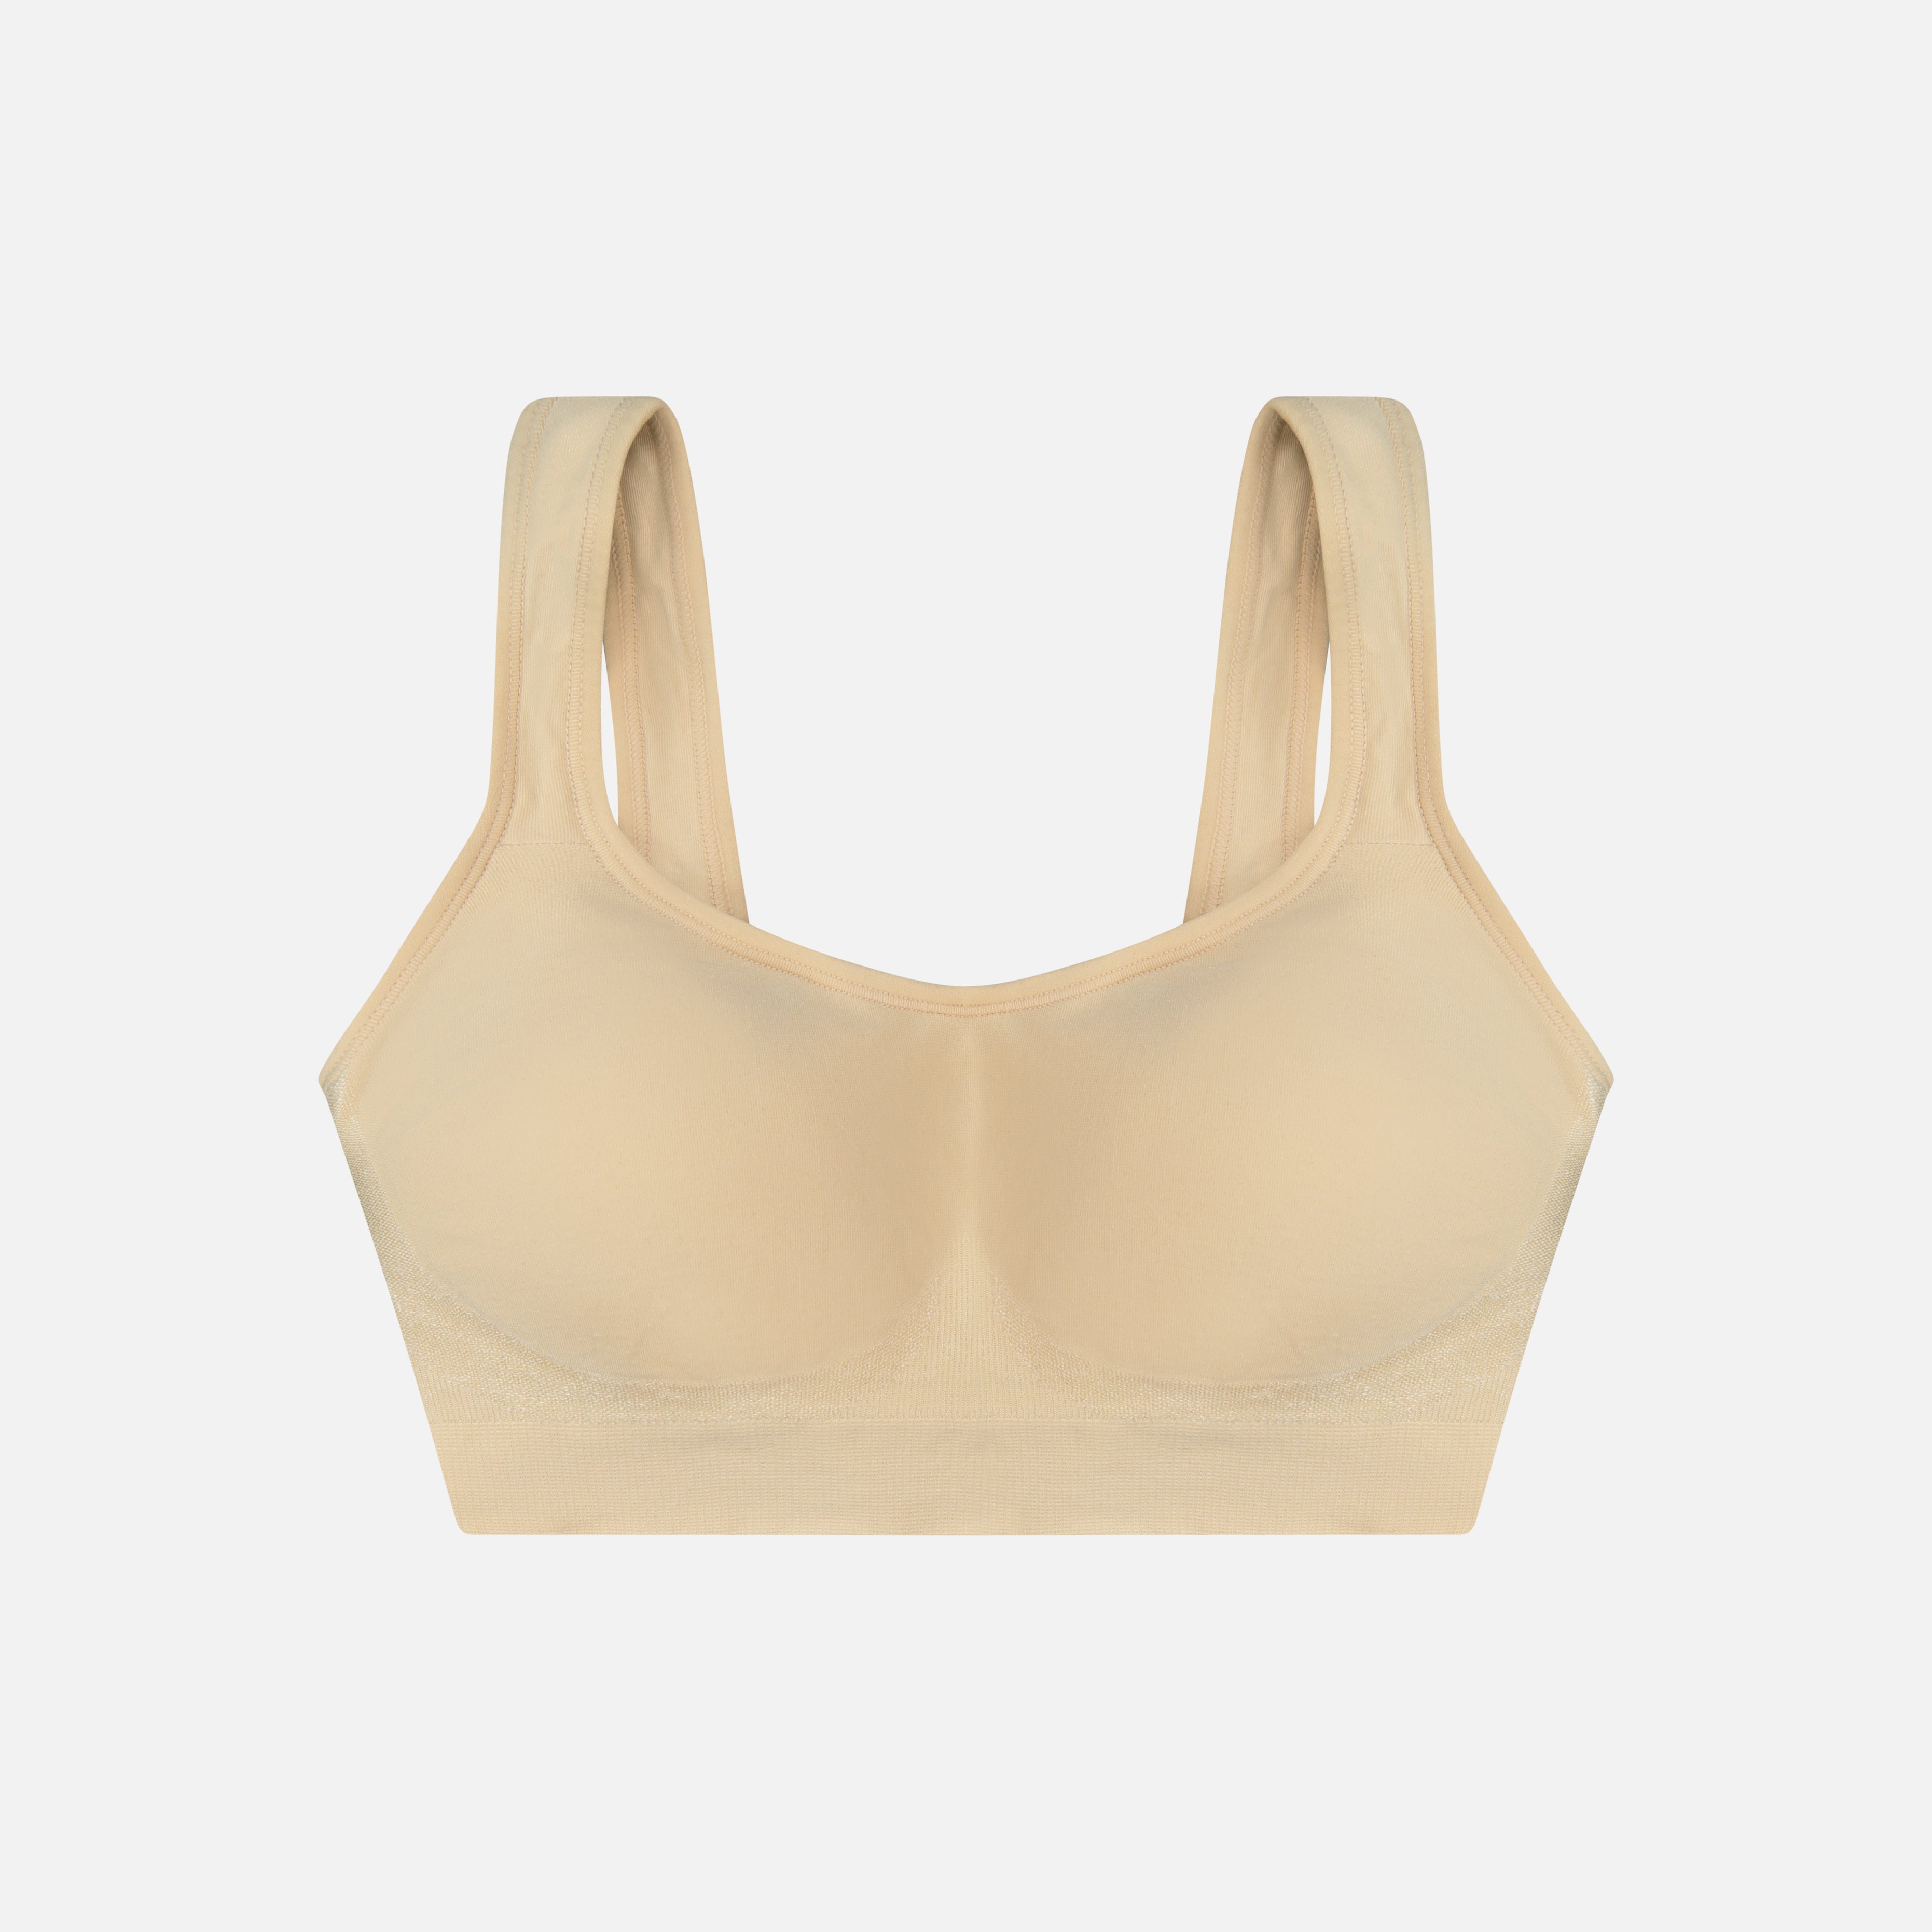 IFG - Fit for any outfit or occasion, our Luxury 07 bra